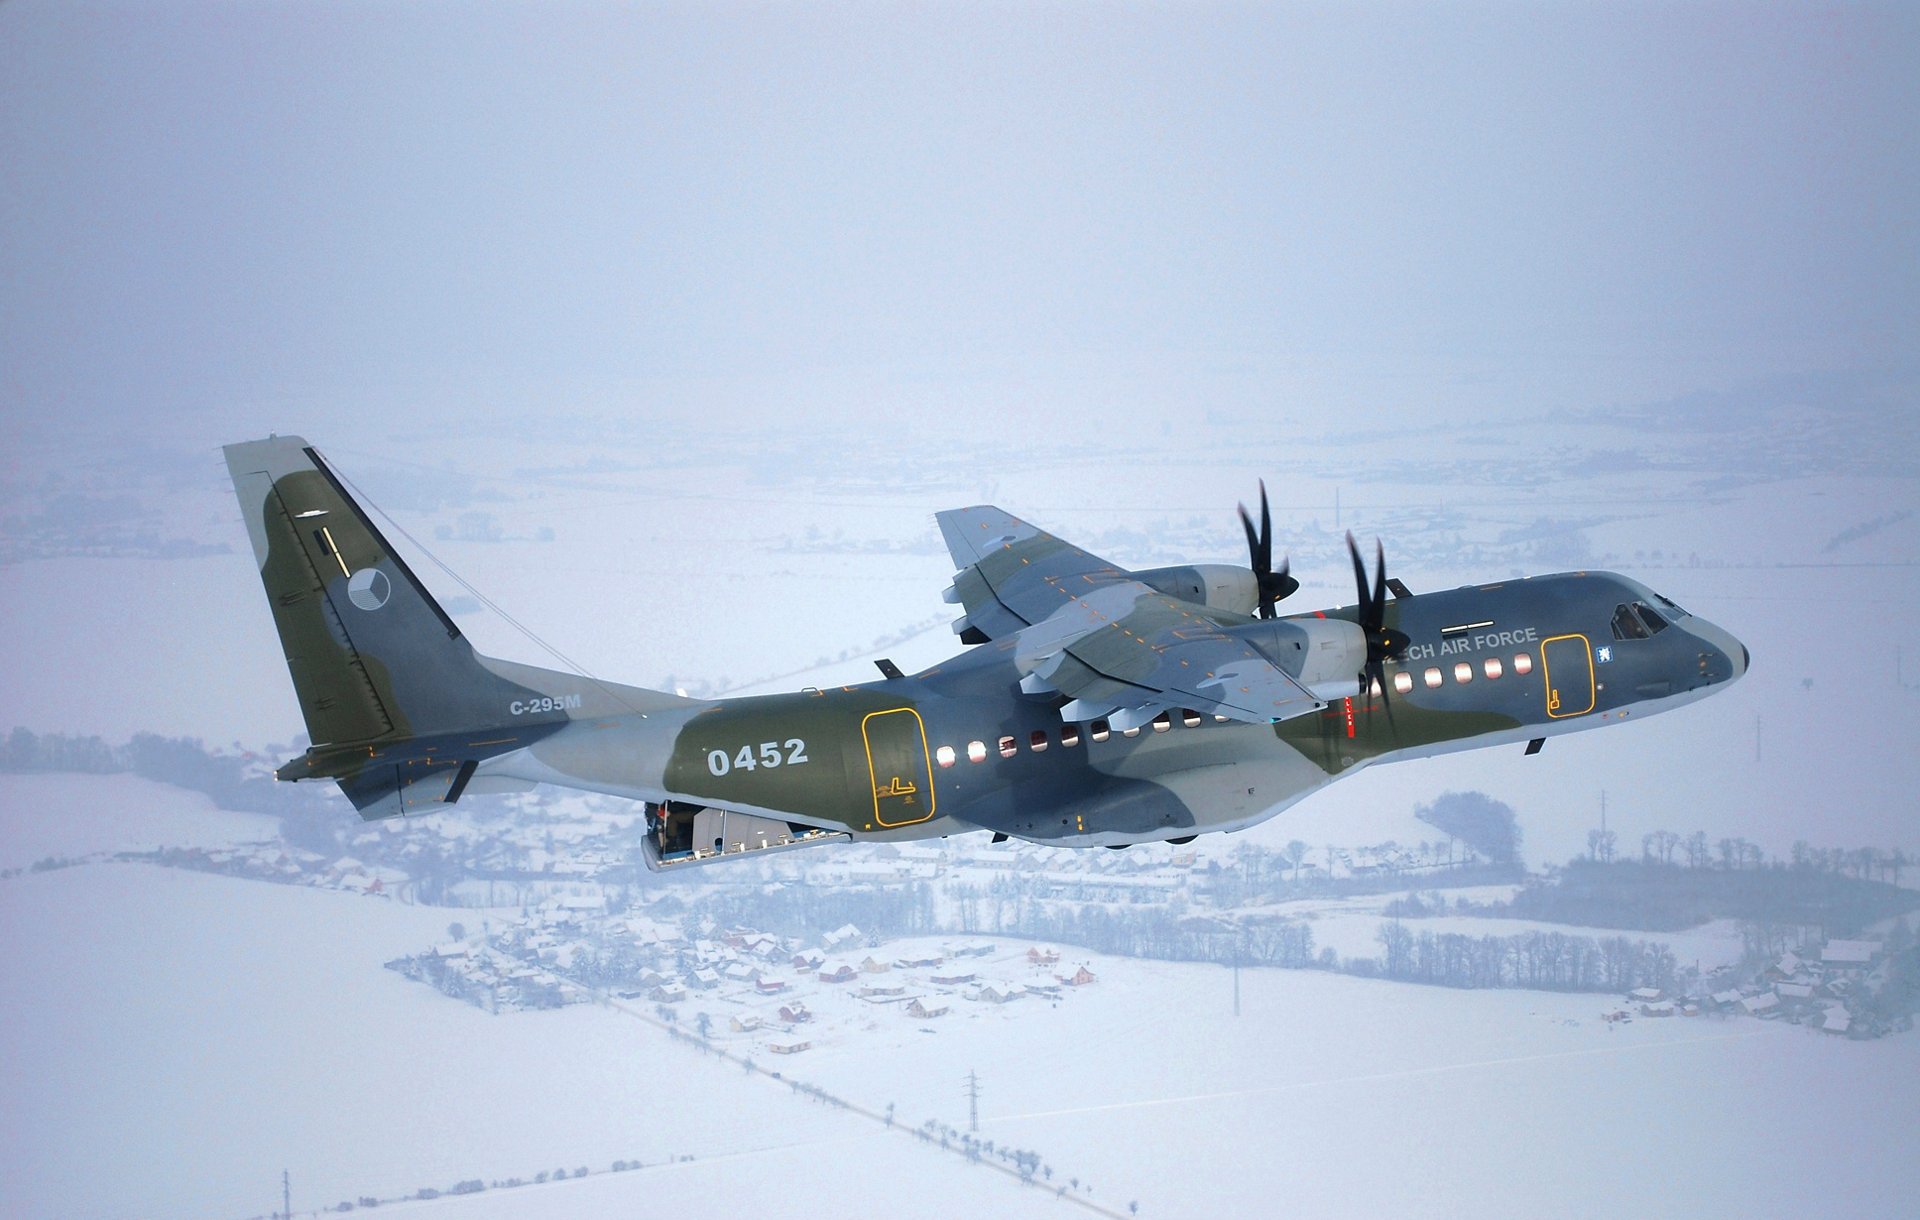 This order for two C295s by the Czech Republic brings Airbus Defence's total bag to five C295 orders over the past week, with two maritime patrol variants for the Irish Air Corps and one transport version for Burkina Faso, both announced Dec. 12. (Airbus photo)